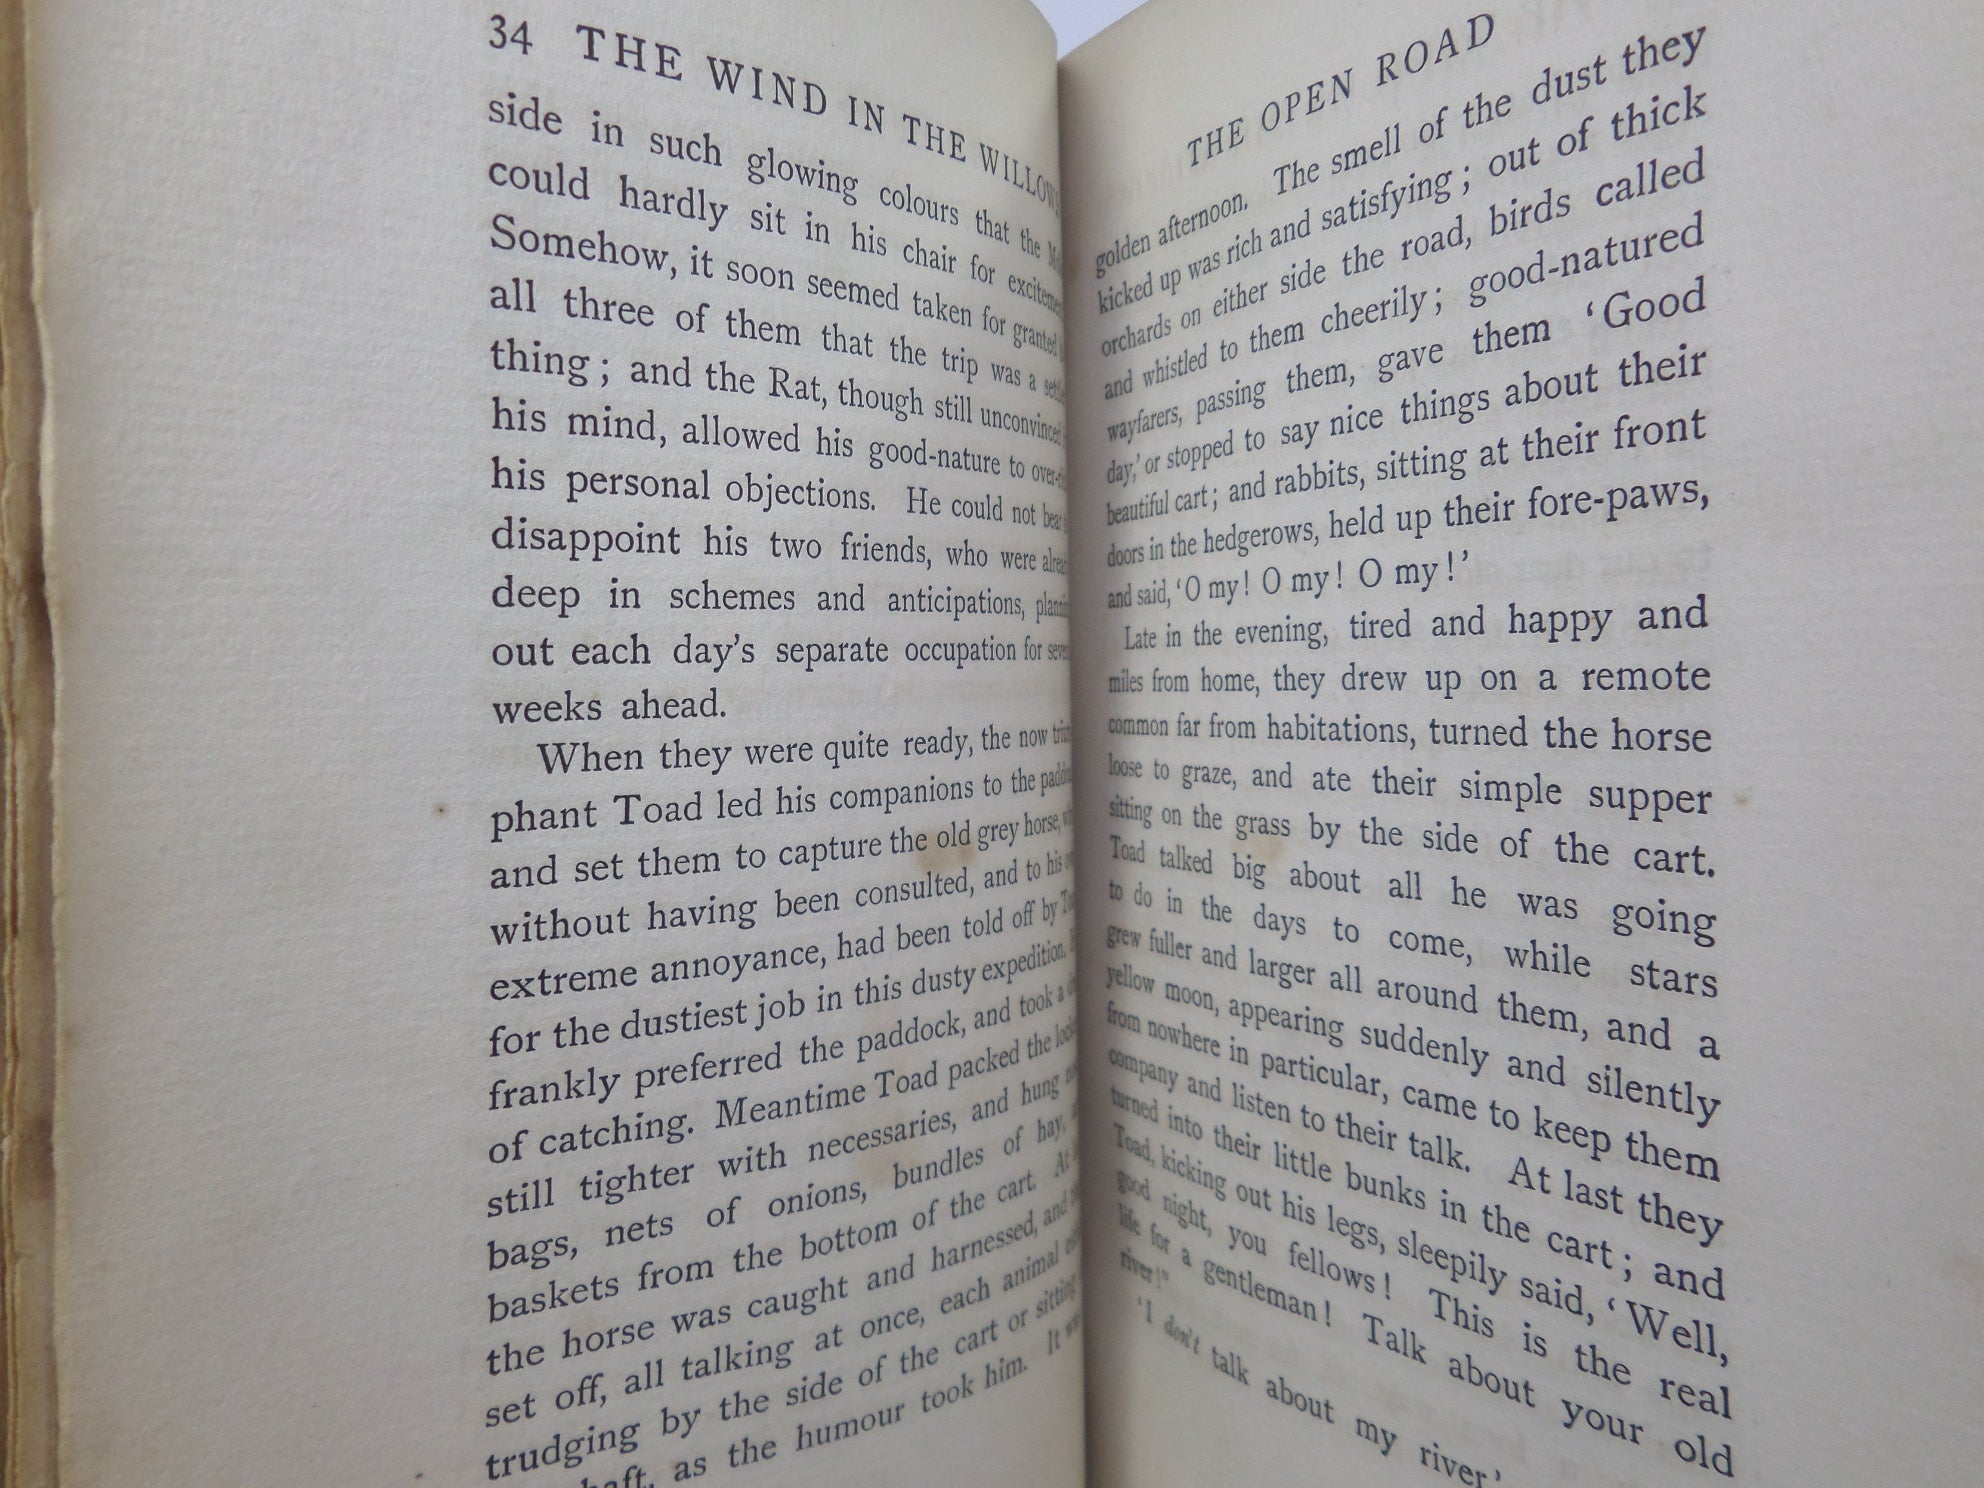 THE WIND IN THE WILLOWS BY KENNETH GRAHAME 1908 FIRST EDITION, LEATHER BINDING